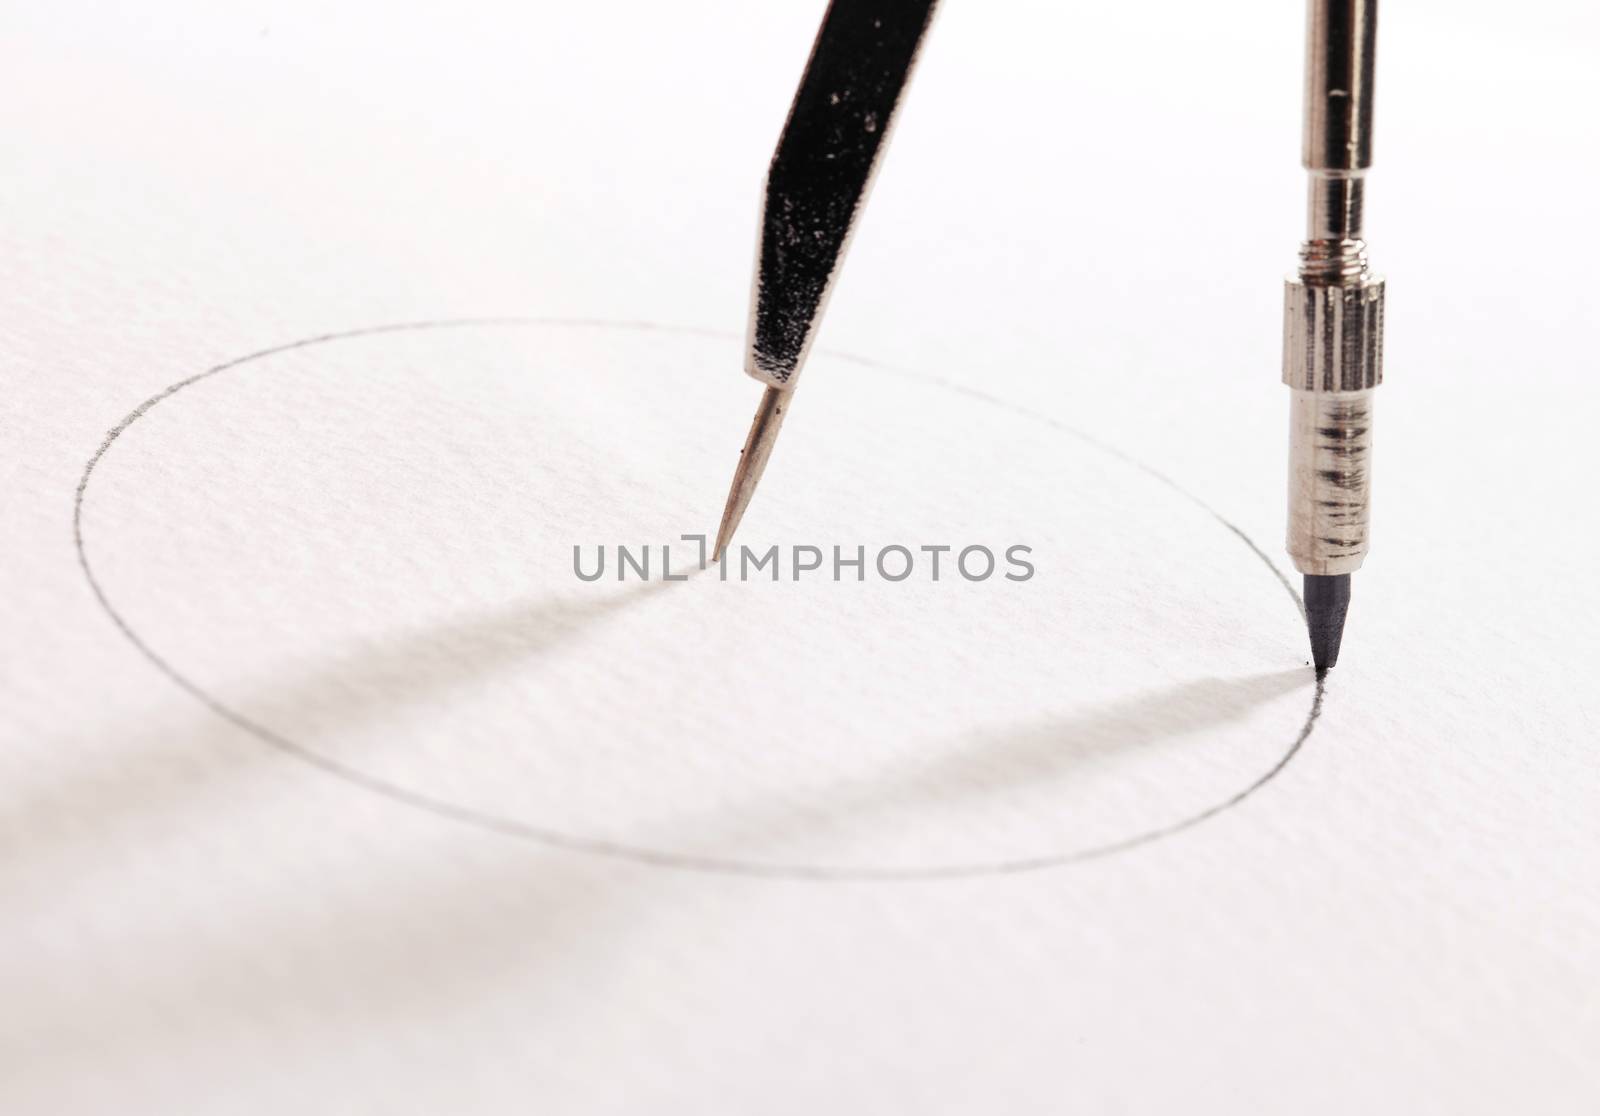 pair of compasses drawing circle on a paper